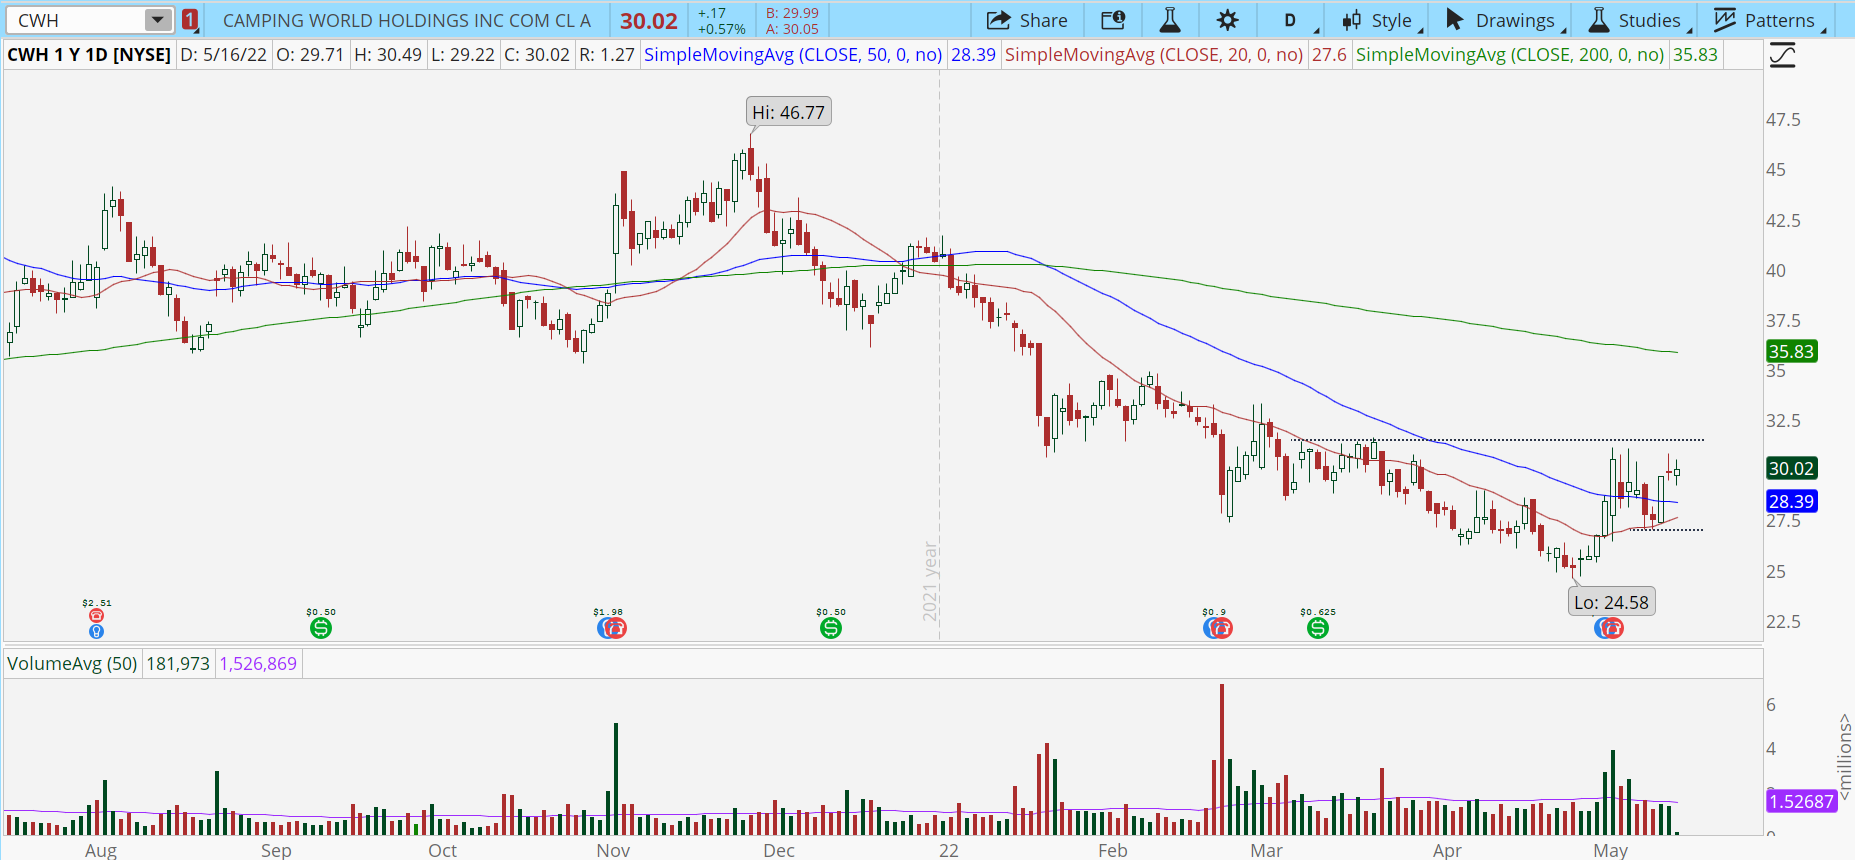 Chart of the Day: Camping World (CWH)